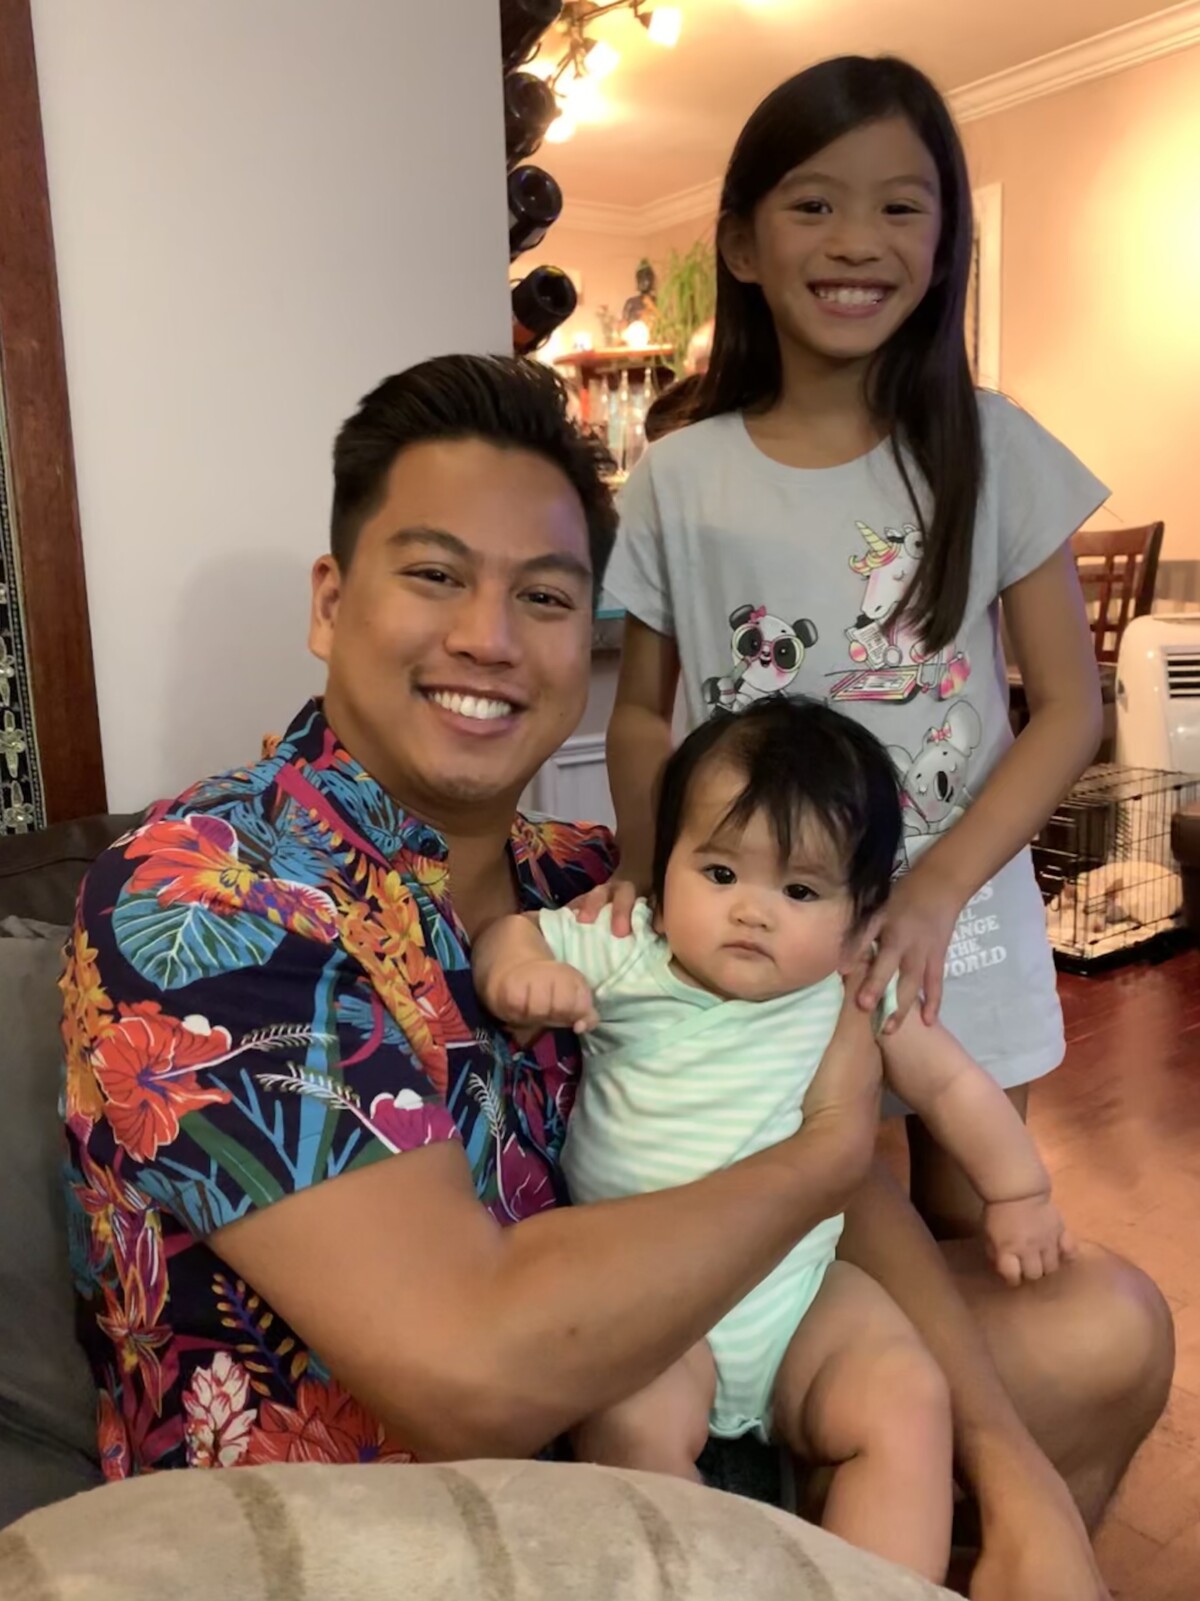 Richie with our nieces, Kaydence & Leilani.